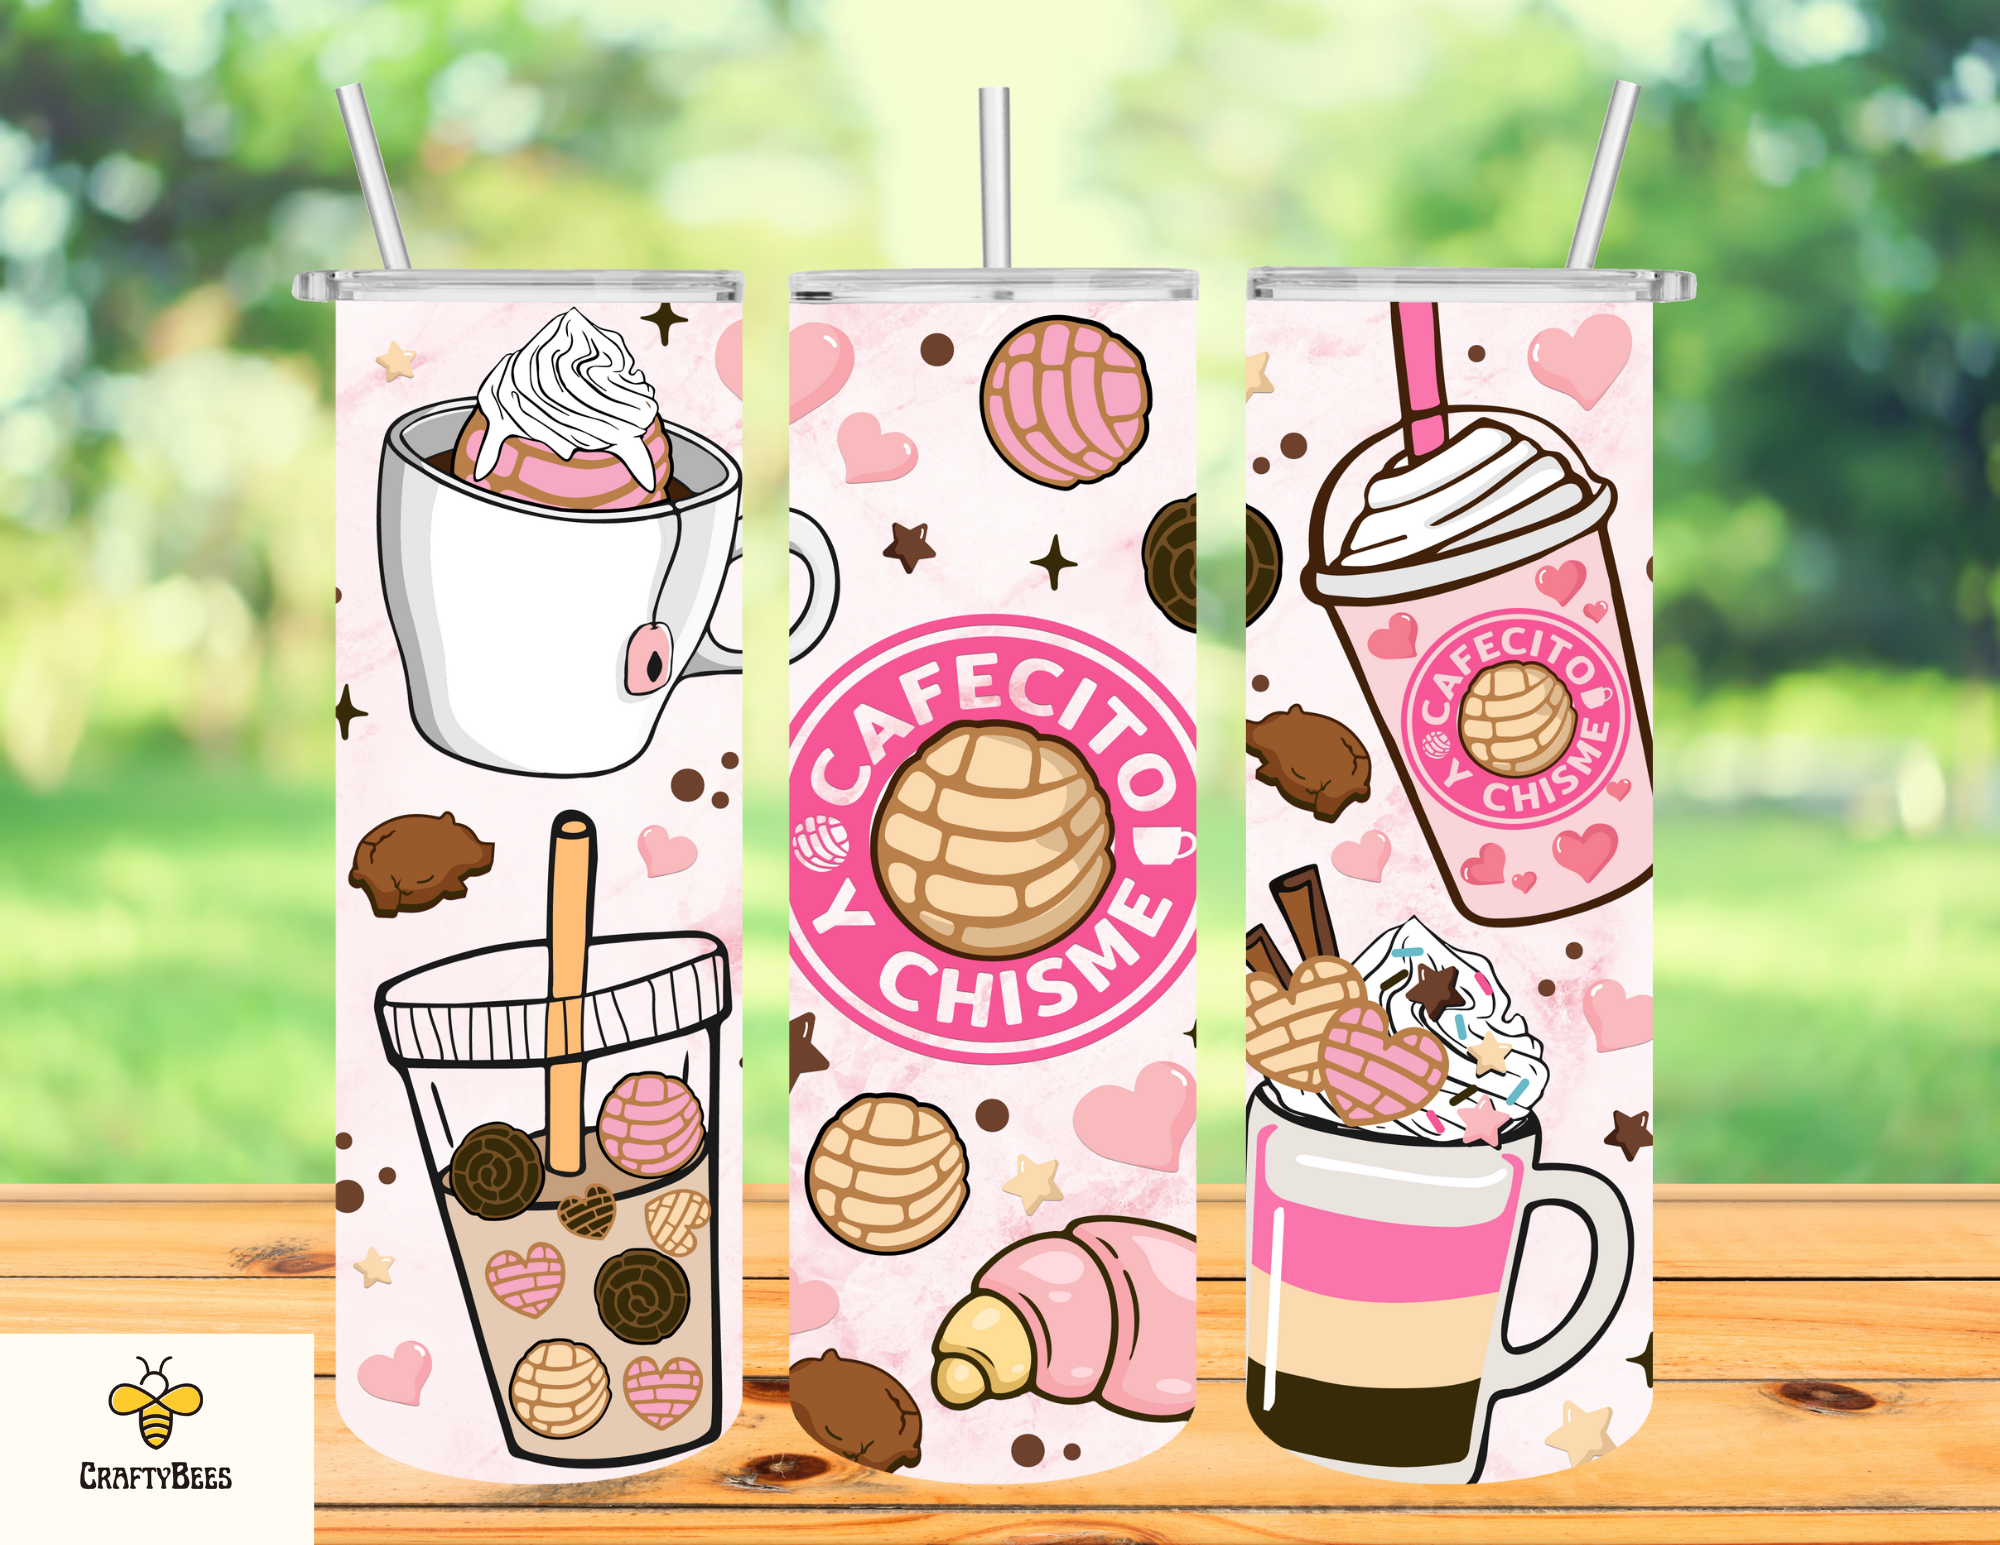 http://crafty-bees.com/cdn/shop/products/CafecitoYChisme.png?v=1667791533